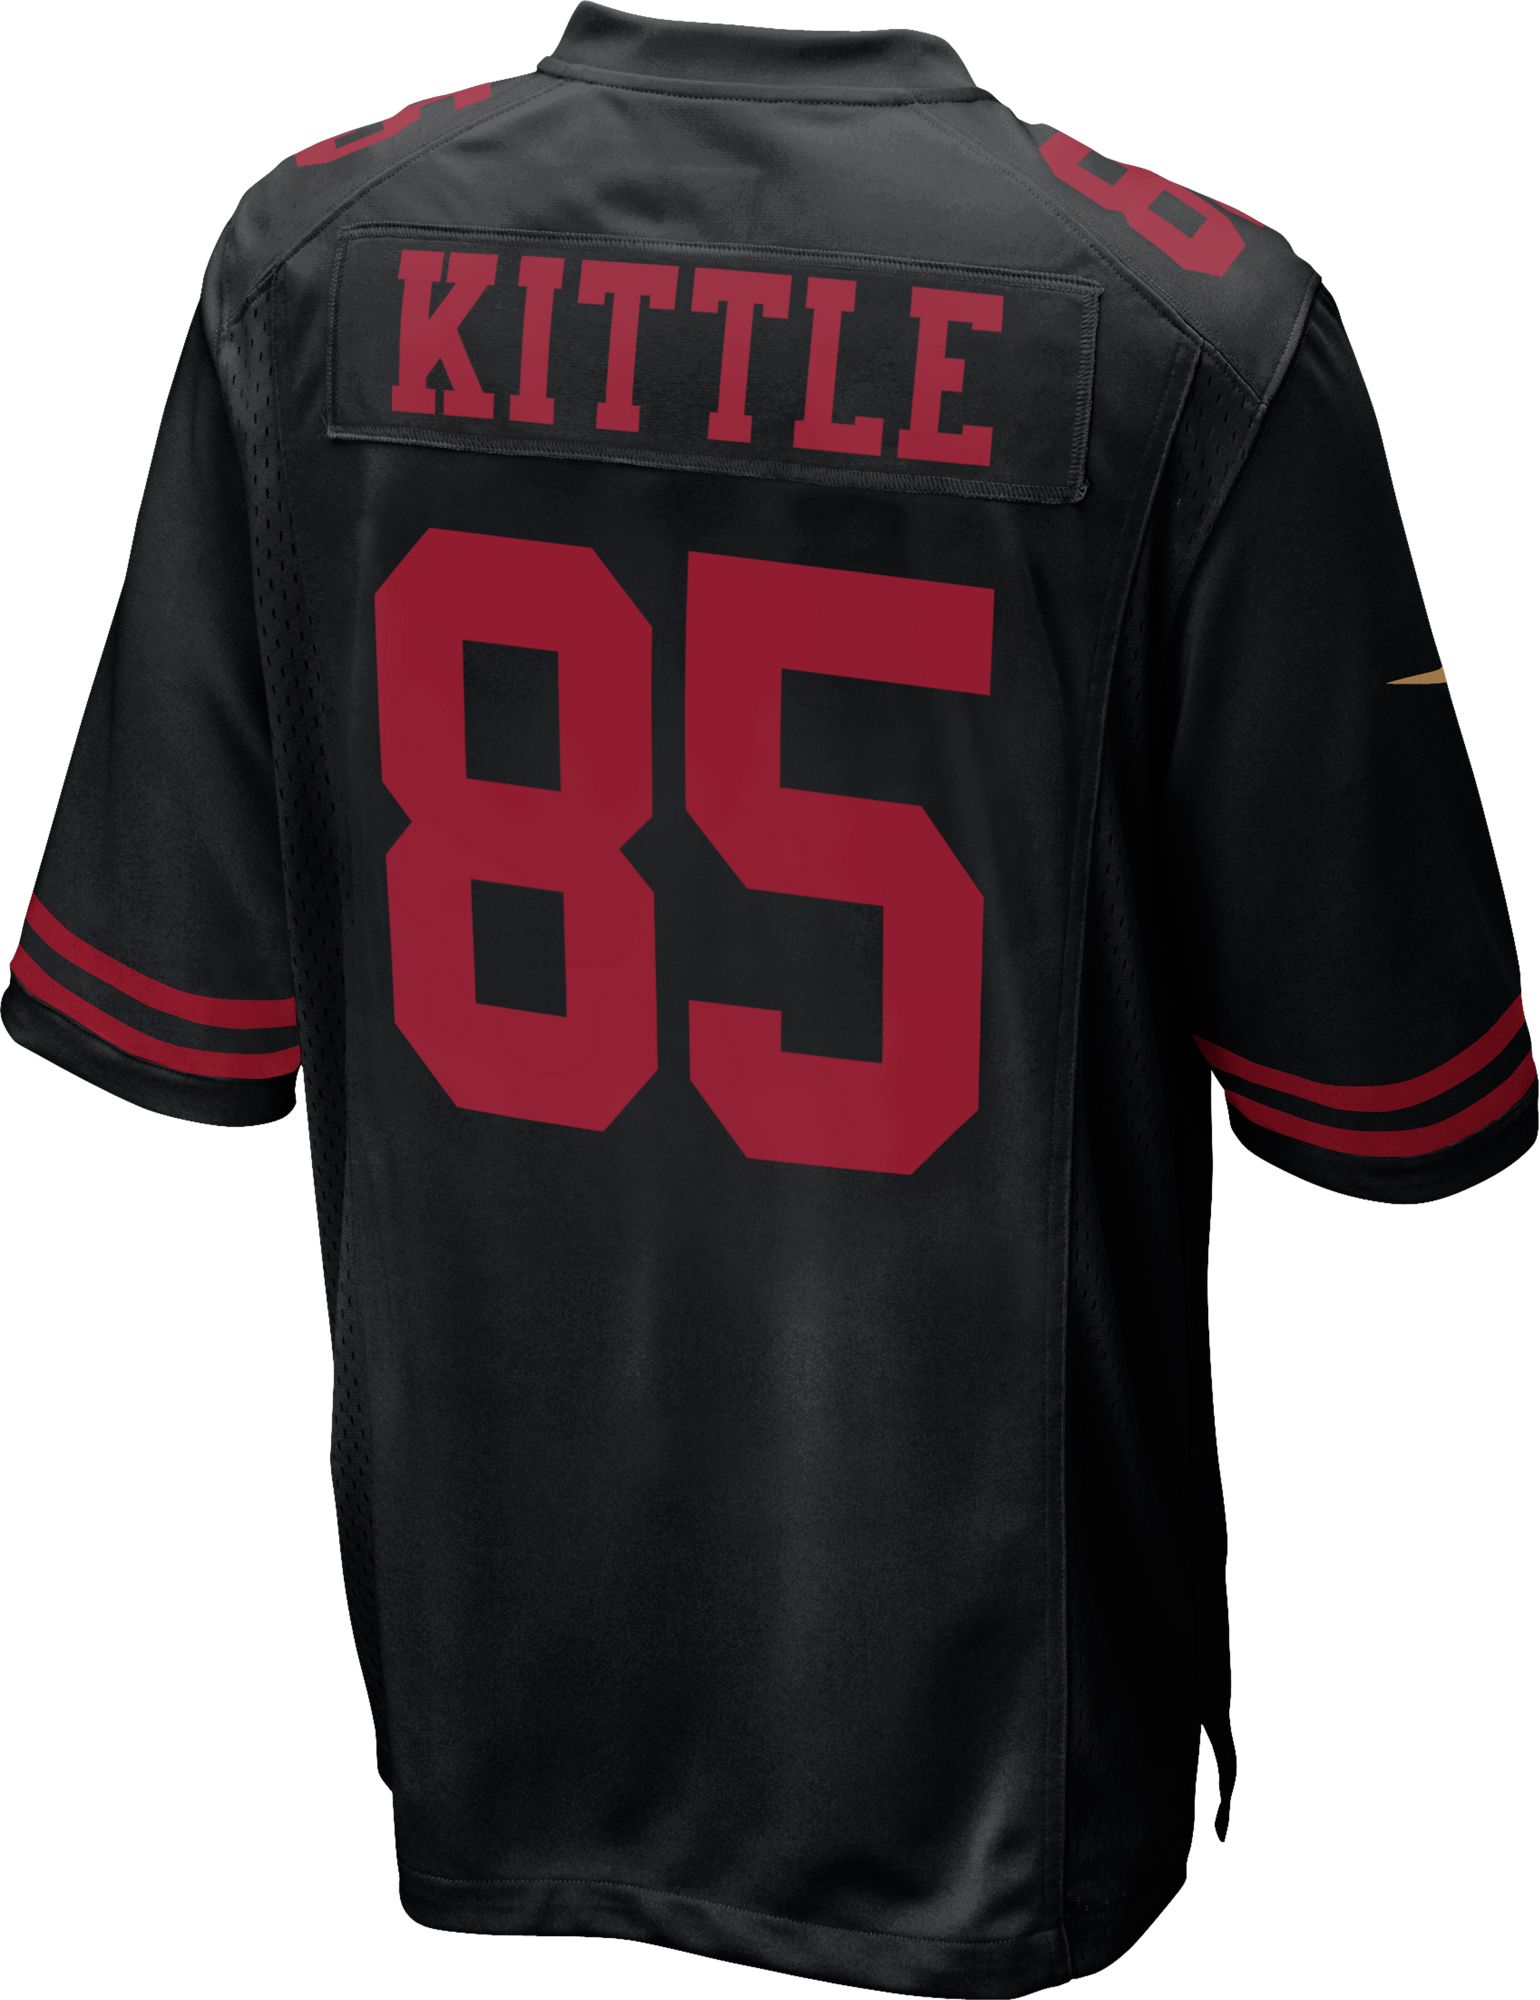 george kittle stitched jersey